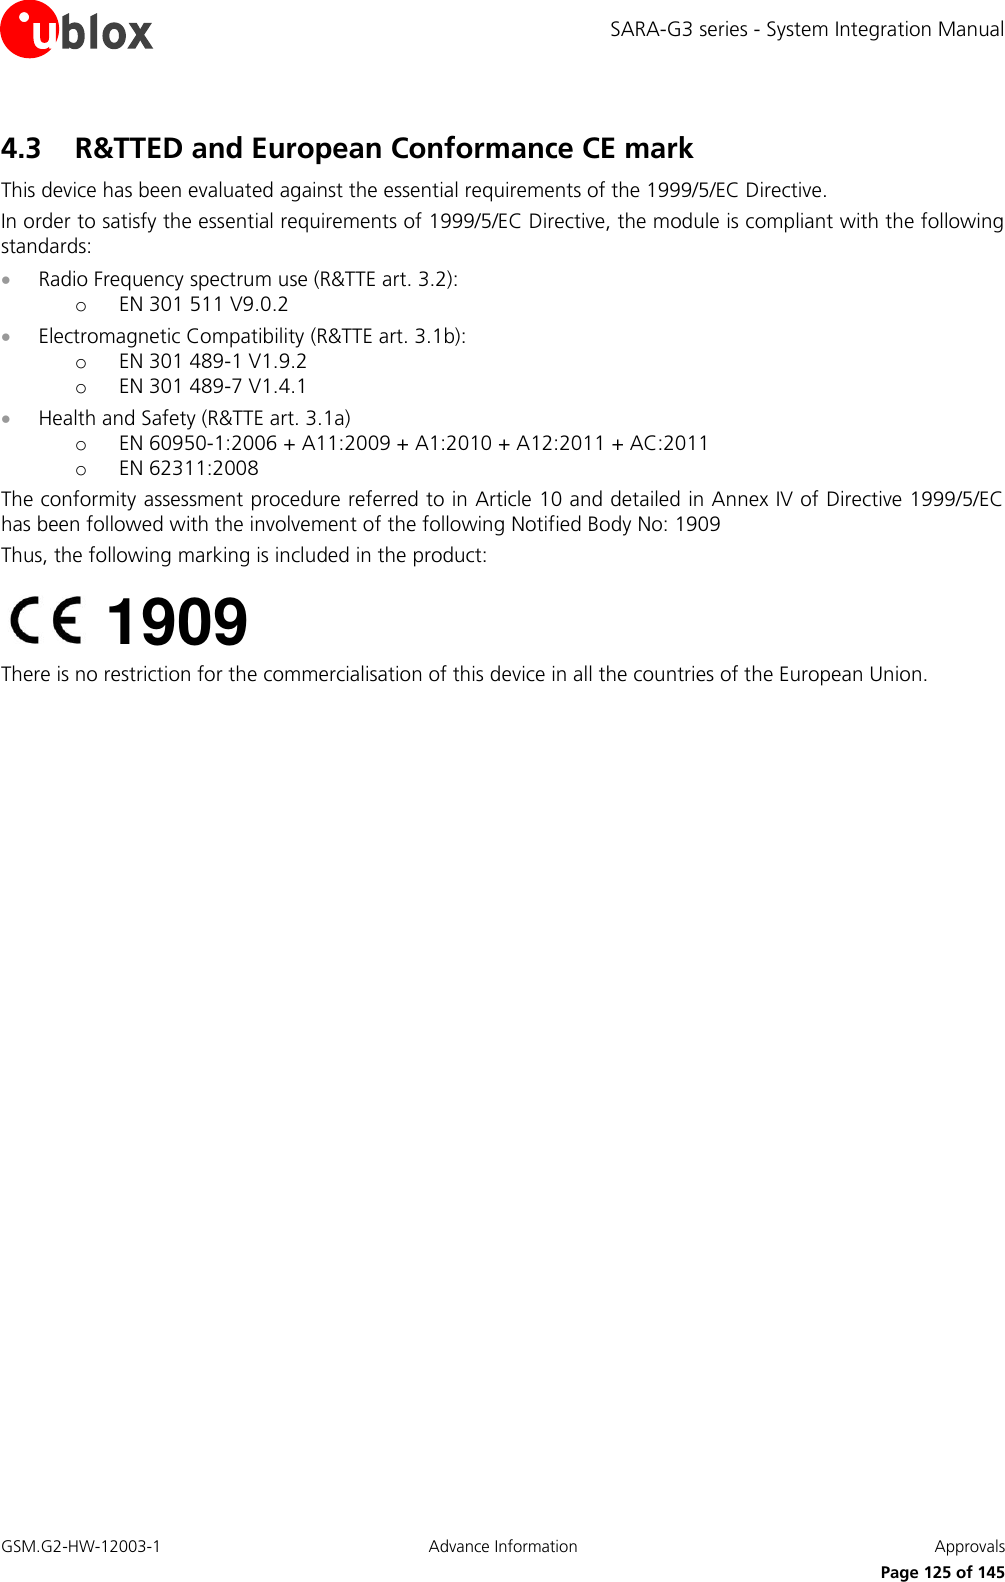 SARA-G3 series - System Integration Manual GSM.G2-HW-12003-1  Advance Information  Approvals     Page 125 of 145 4.3 R&amp;TTED and European Conformance CE mark  This device has been evaluated against the essential requirements of the 1999/5/EC Directive. In order to satisfy the essential requirements of 1999/5/EC Directive, the module is compliant with the following standards:  Radio Frequency spectrum use (R&amp;TTE art. 3.2): o EN 301 511 V9.0.2  Electromagnetic Compatibility (R&amp;TTE art. 3.1b): o EN 301 489-1 V1.9.2 o EN 301 489-7 V1.4.1  Health and Safety (R&amp;TTE art. 3.1a) o EN 60950-1:2006 + A11:2009 + A1:2010 + A12:2011 + AC:2011 o EN 62311:2008 The conformity assessment procedure referred to in Article 10 and detailed in Annex IV of Directive 1999/5/EC has been followed with the involvement of the following Notified Body No: 1909 Thus, the following marking is included in the product:  There is no restriction for the commercialisation of this device in all the countries of the European Union.   1909 